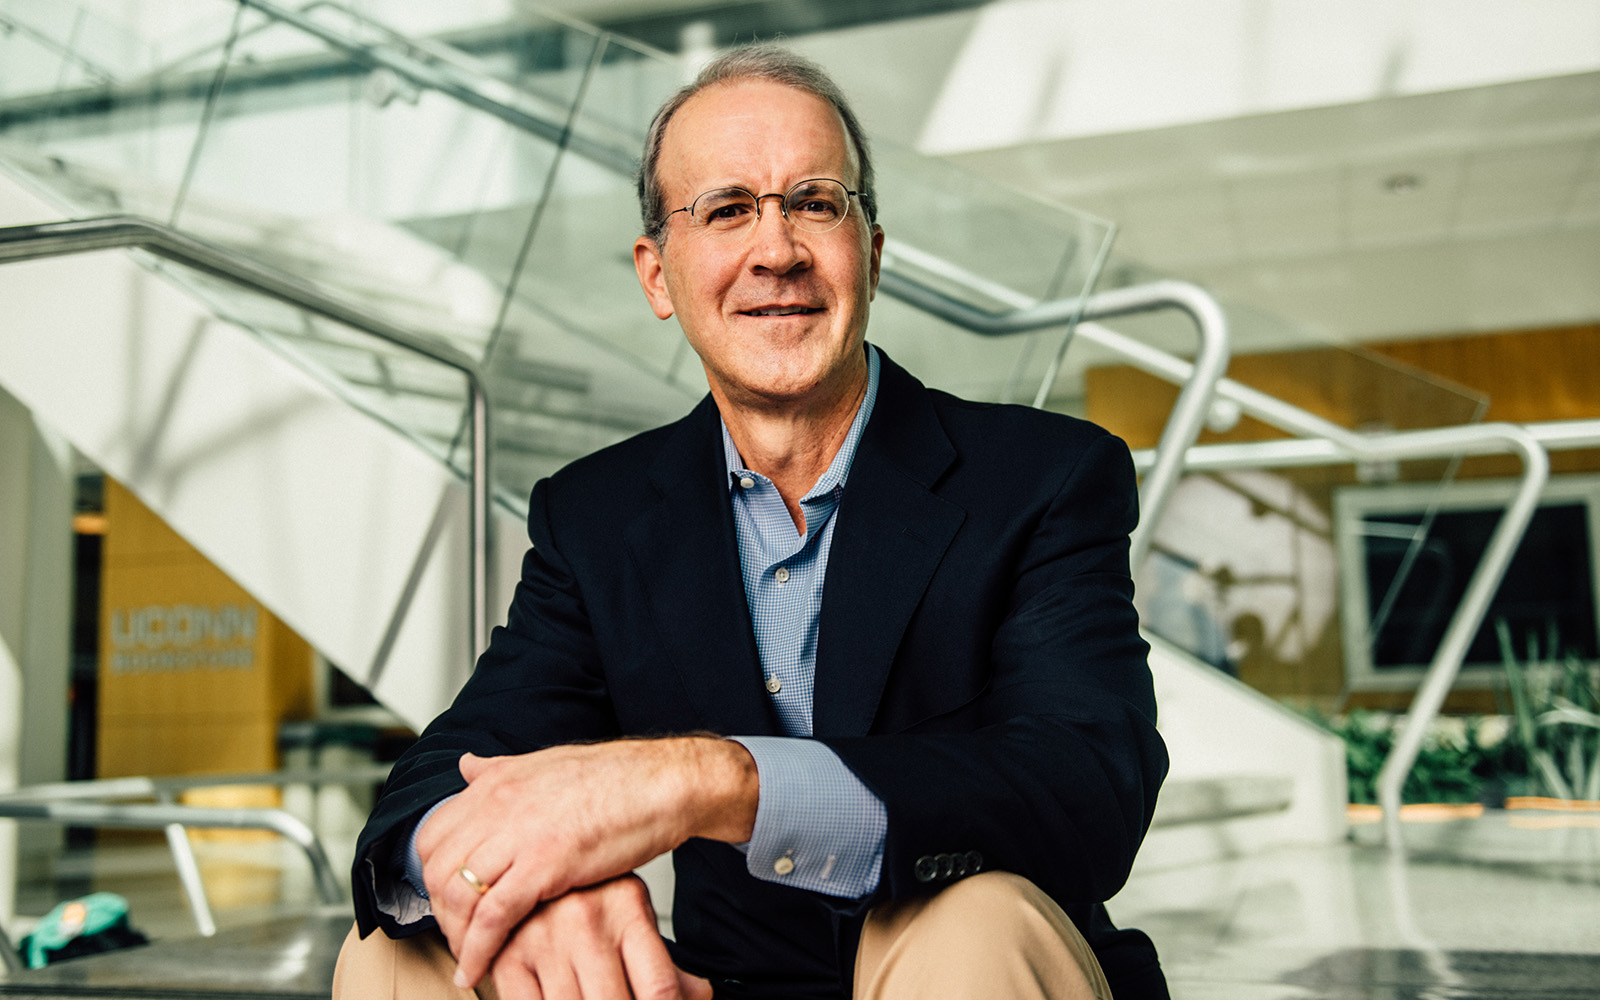 Blake Mather retired after 22 years at Goldman Sachs.  Now, he is an adjunct professor and advisor to the UConn Student Managed Fund in Stamford, giving students the opportunity to gain practical experience in investment strategies. (Nathan Oldham / UConn School of Business)  